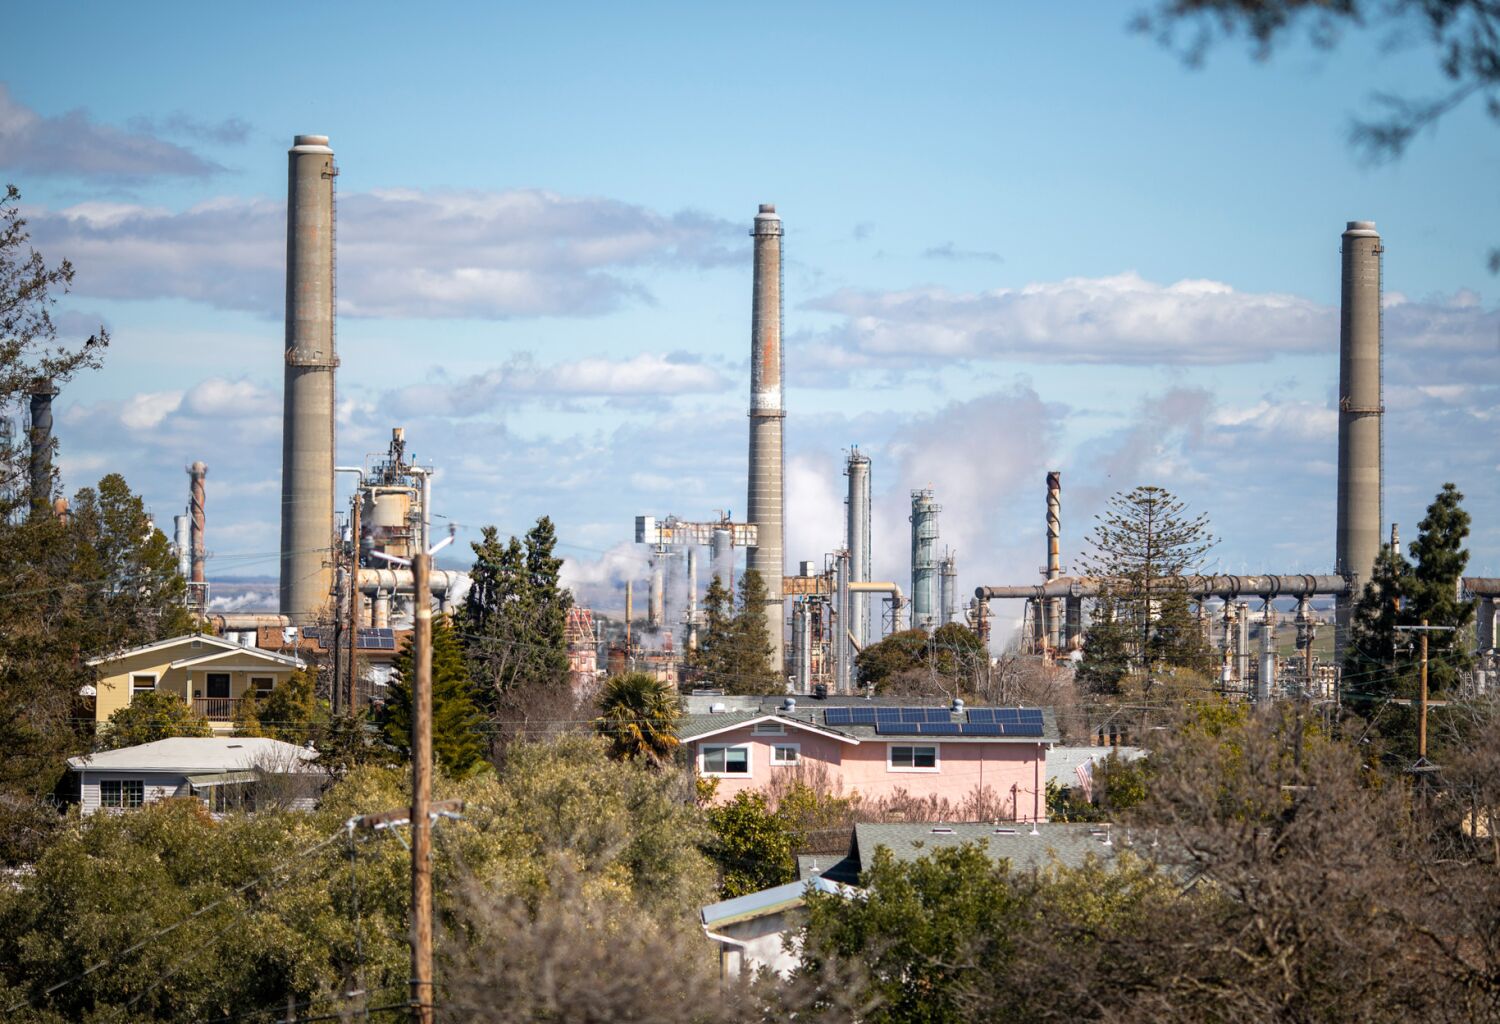 A Bay Area city reels from refinery's hazardous fallout. Did warnings come too late? 